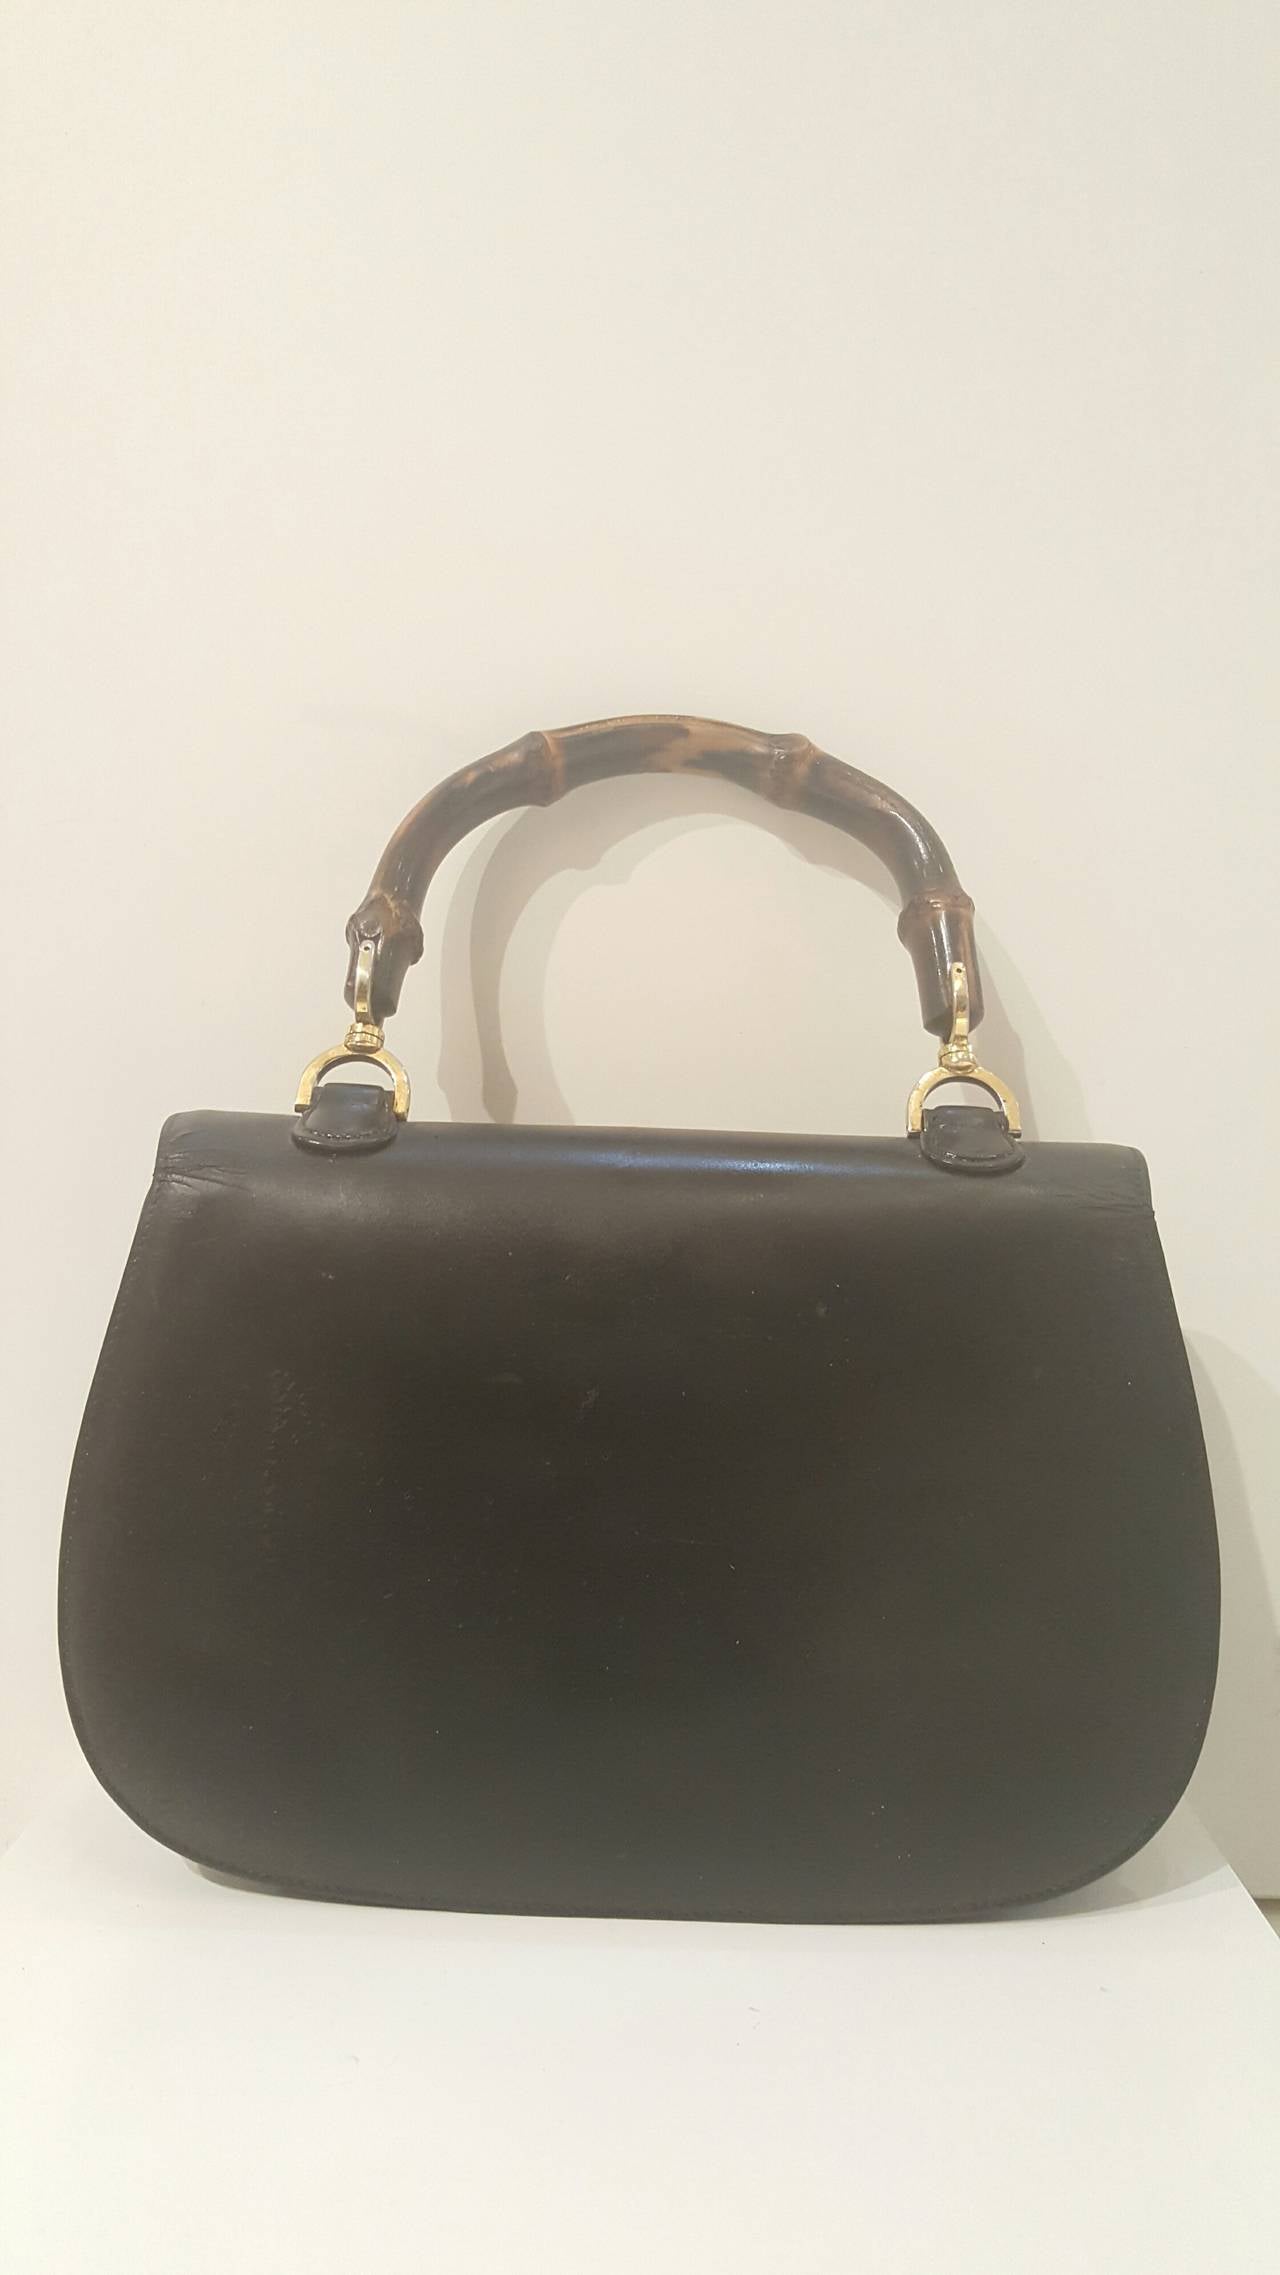 1980s Gucci Bamboo black leather handbag
GUCCI Vintage Leather Bamboo Top Handle Bag in Black. This stylish tote is crafted of black leather. The bag features a looping bamboo top handle, a frontal flap, brass hardware and a bamboo turn lock and